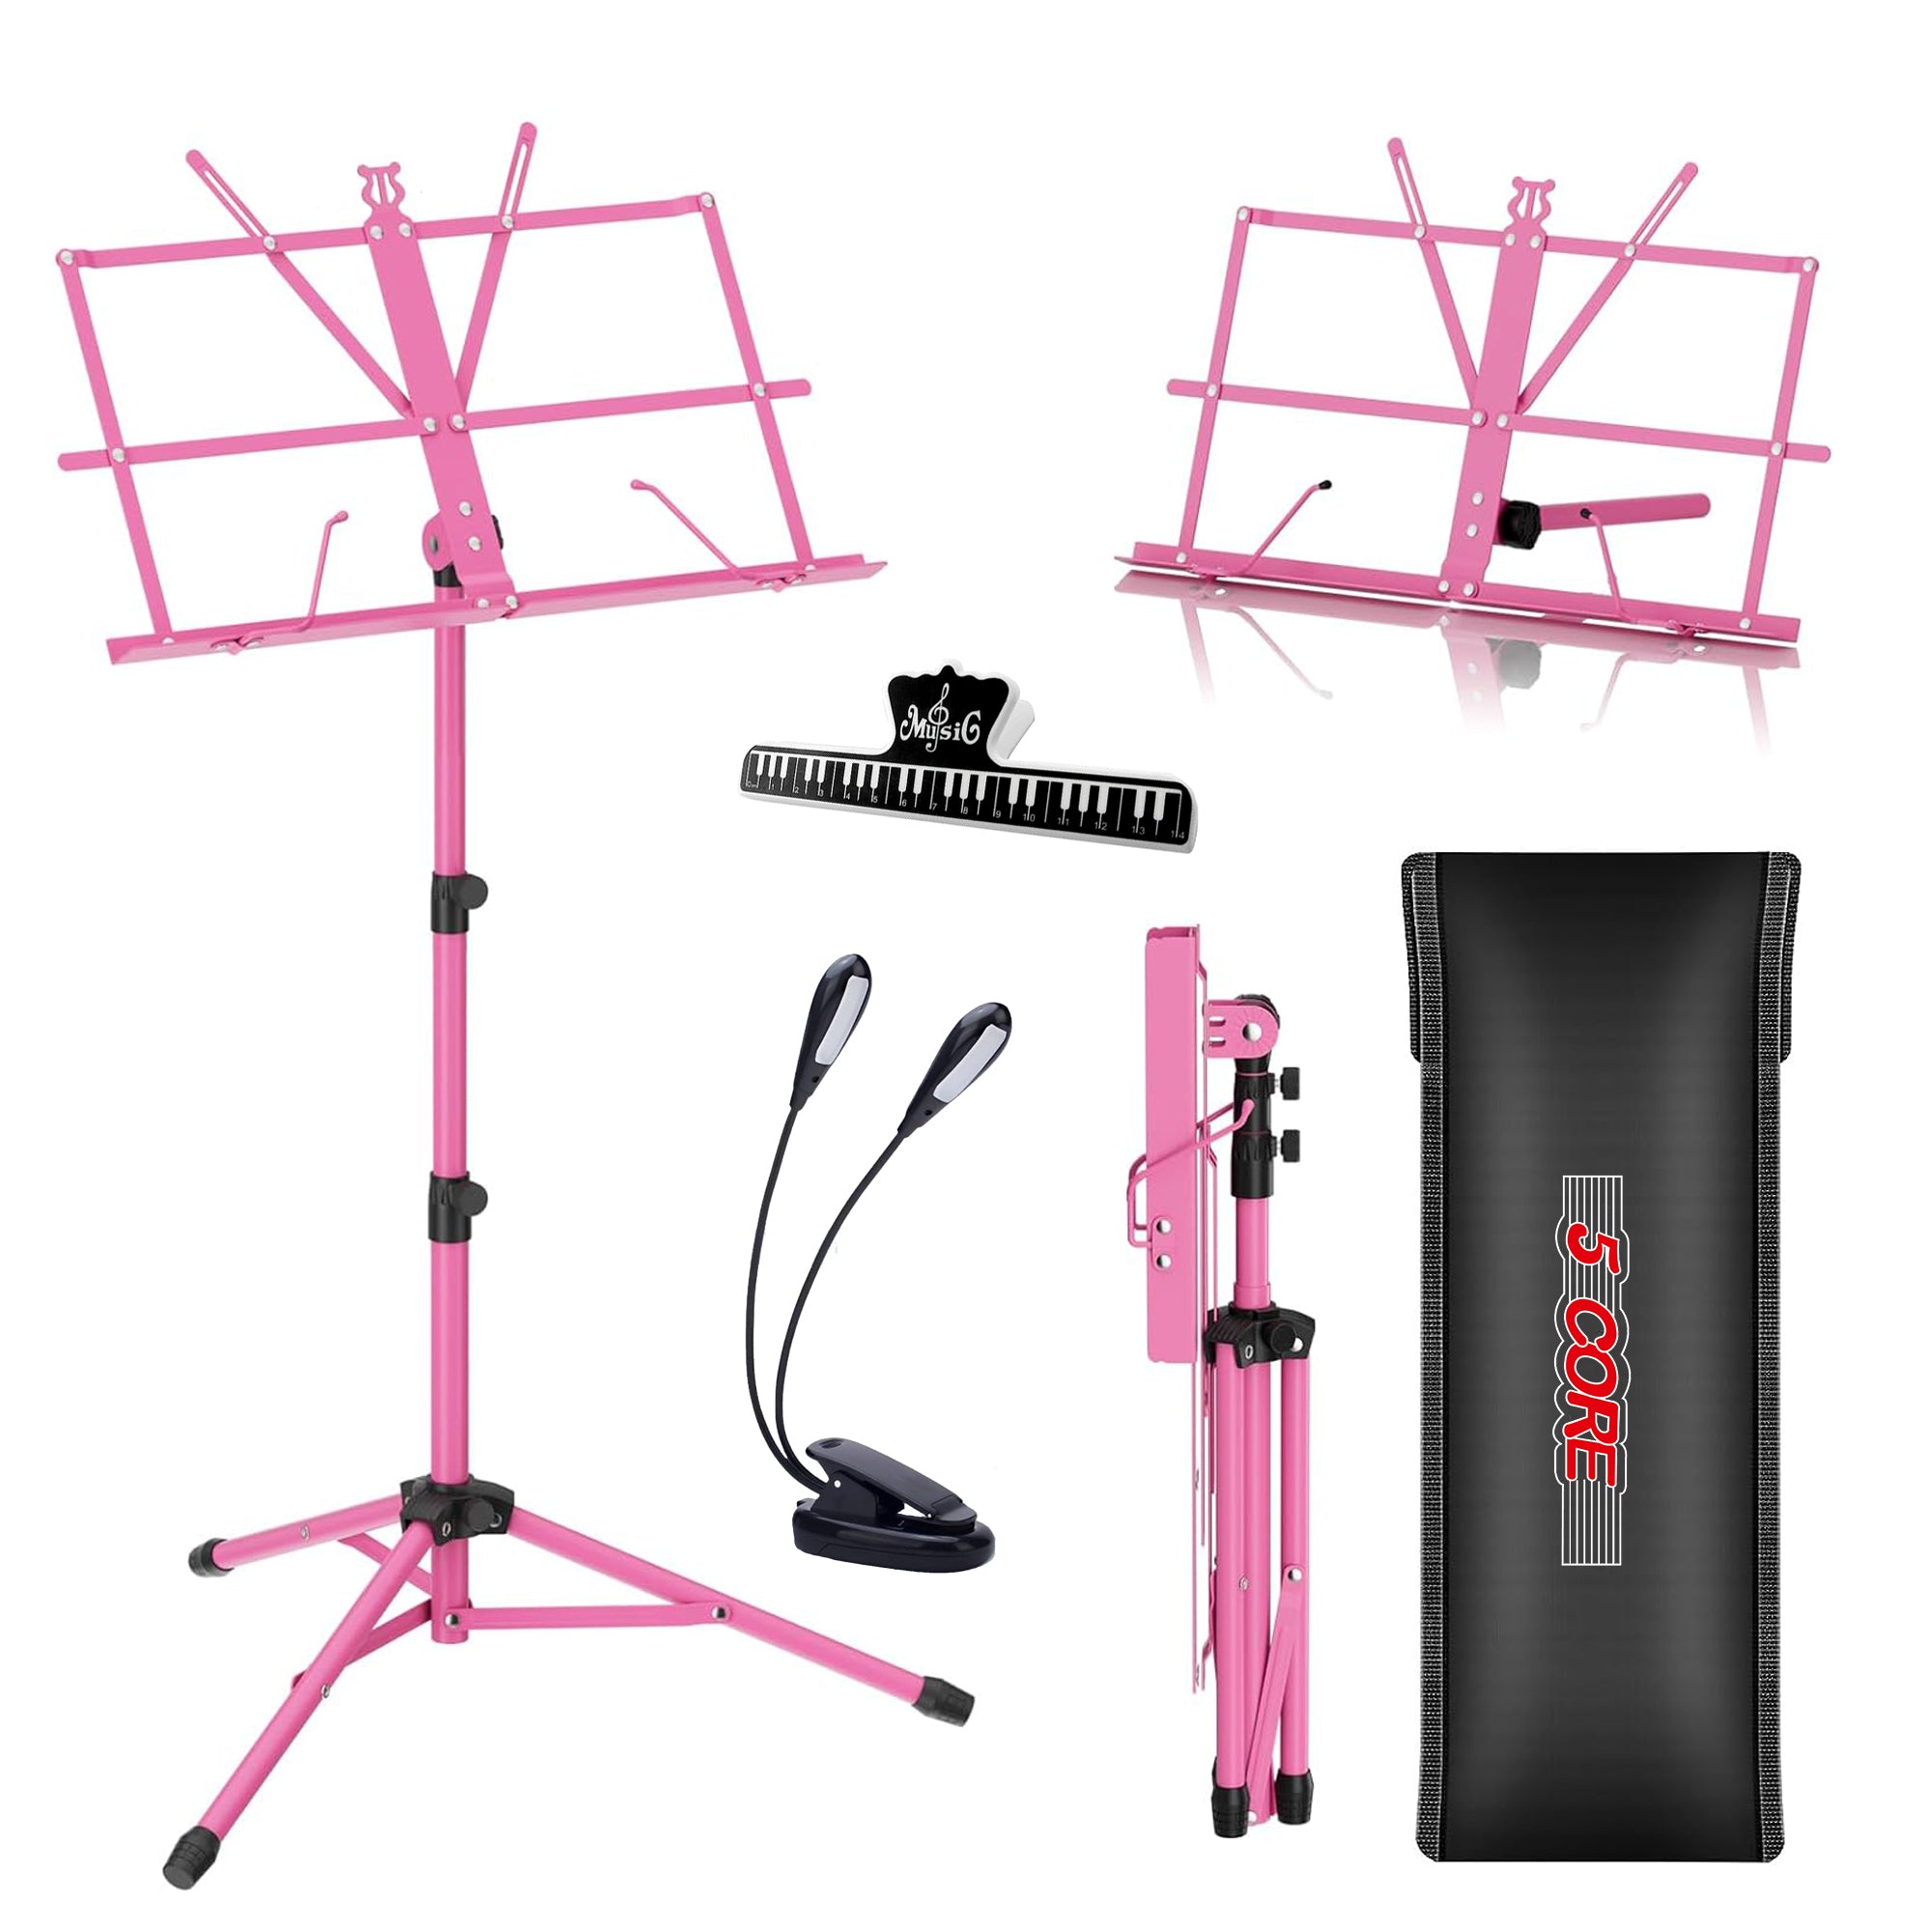 5 Core Music Stand Pink 2 in 1 Dual-Use Adjustable Folding Sheet Stand Metal Build Portable Sheet Holder